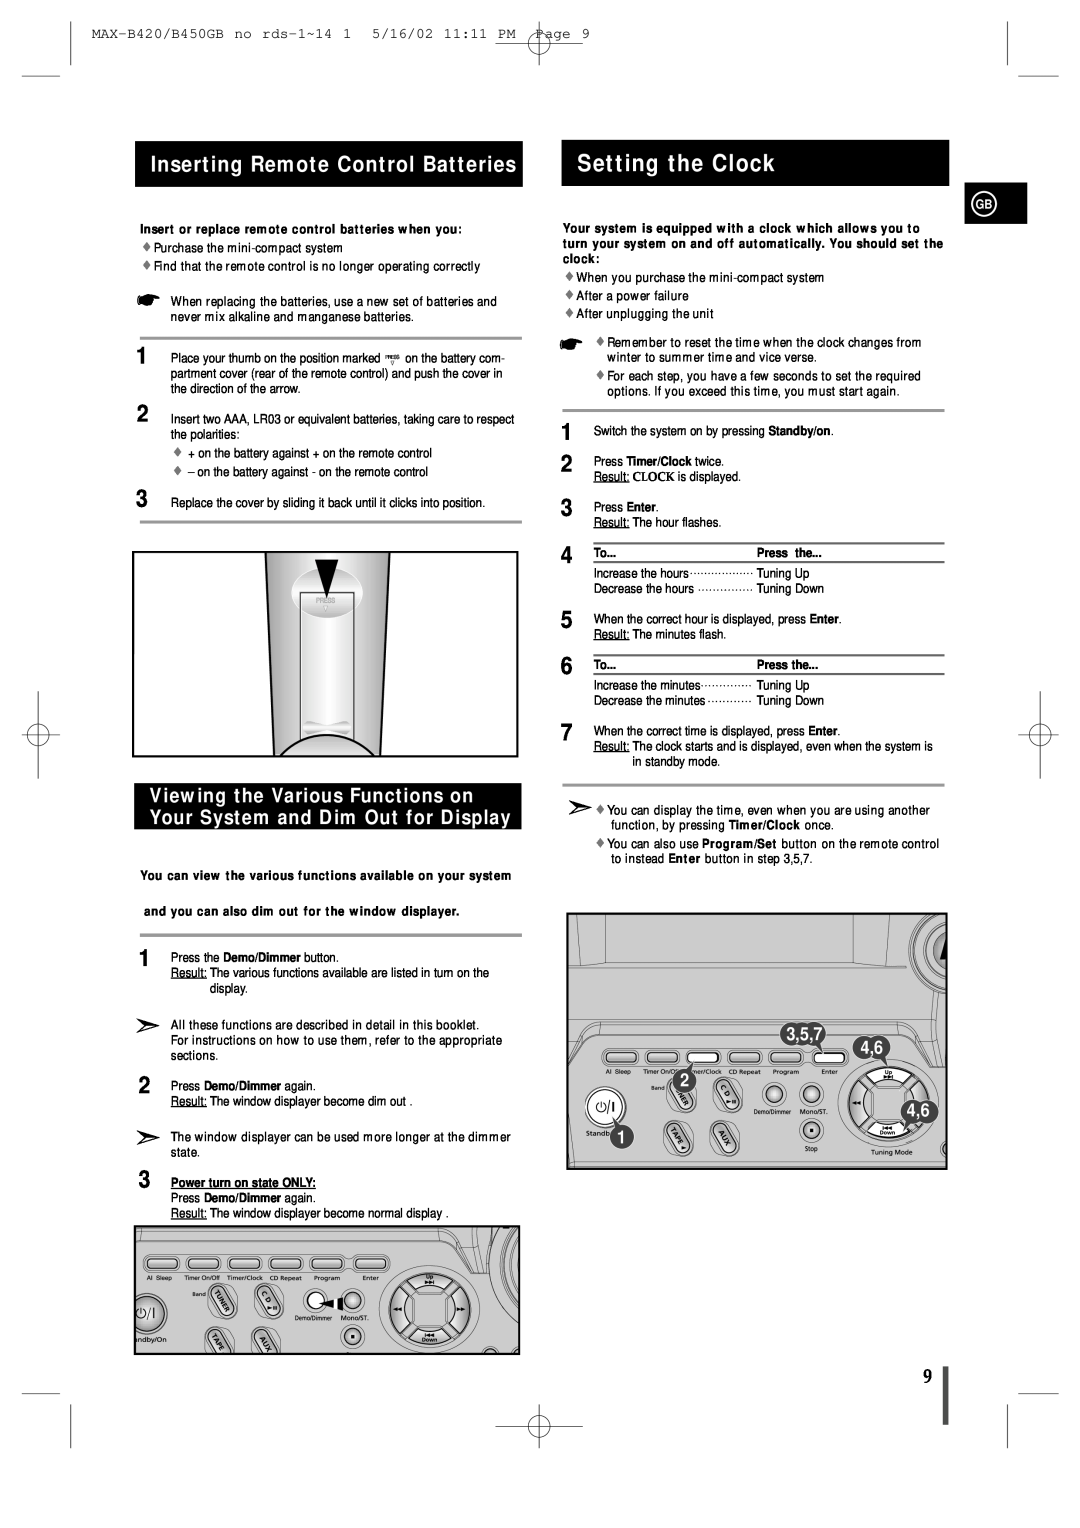 Samsung MAX-B450 instruction manual Setting the Clock, Inserting Remote Control Batteries 